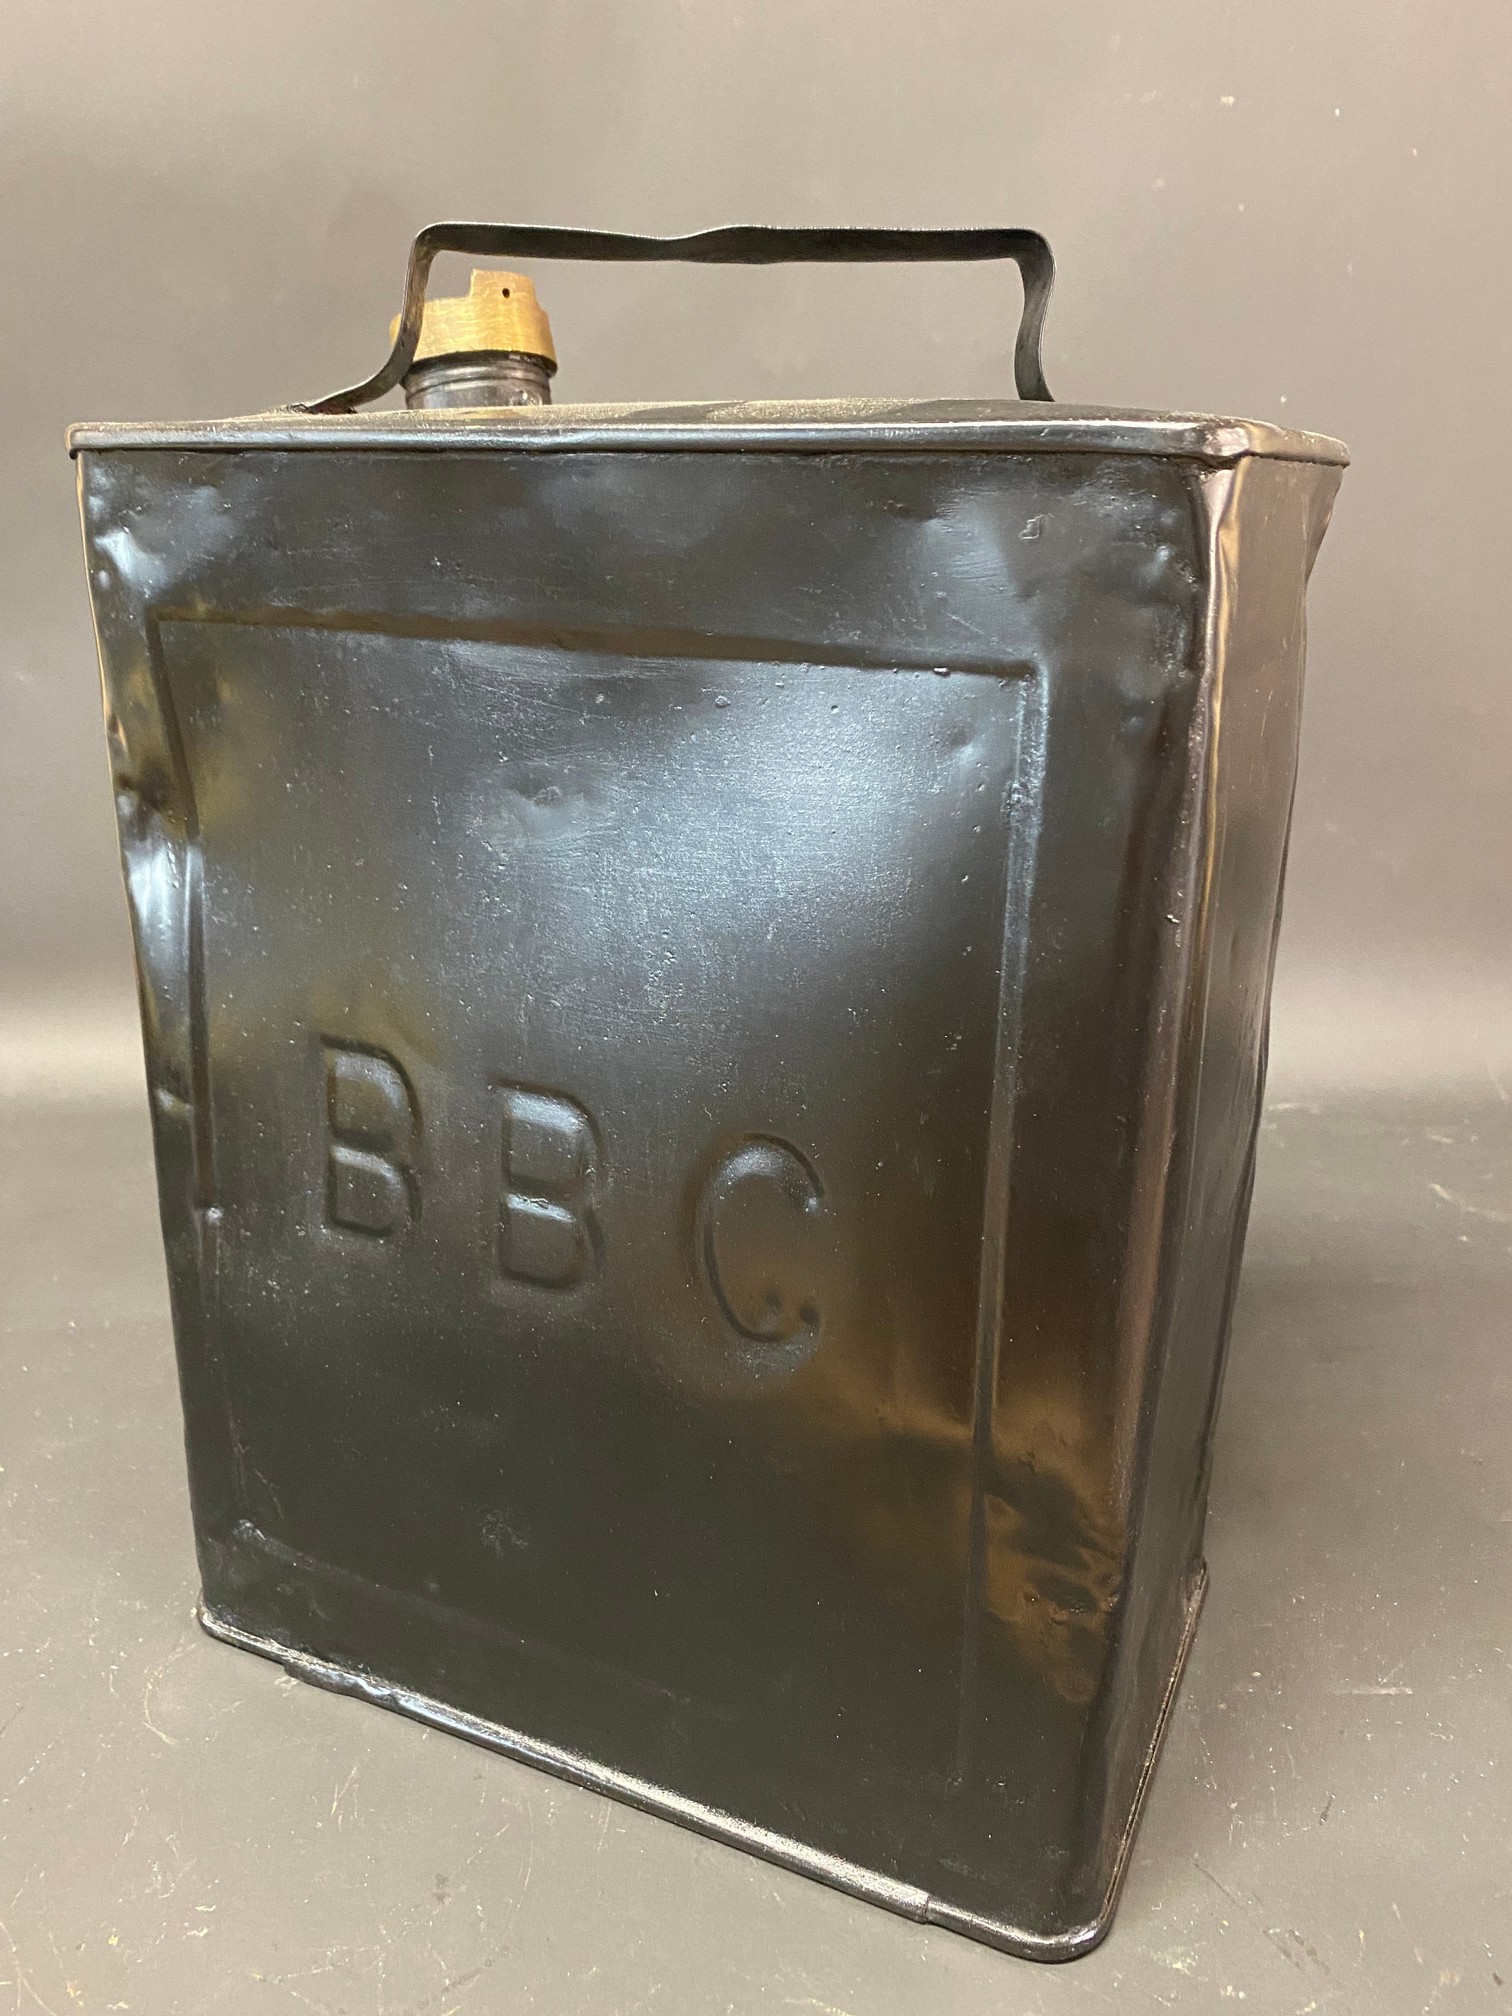 A BBC two gallon petrol can with coronet motif to the top.